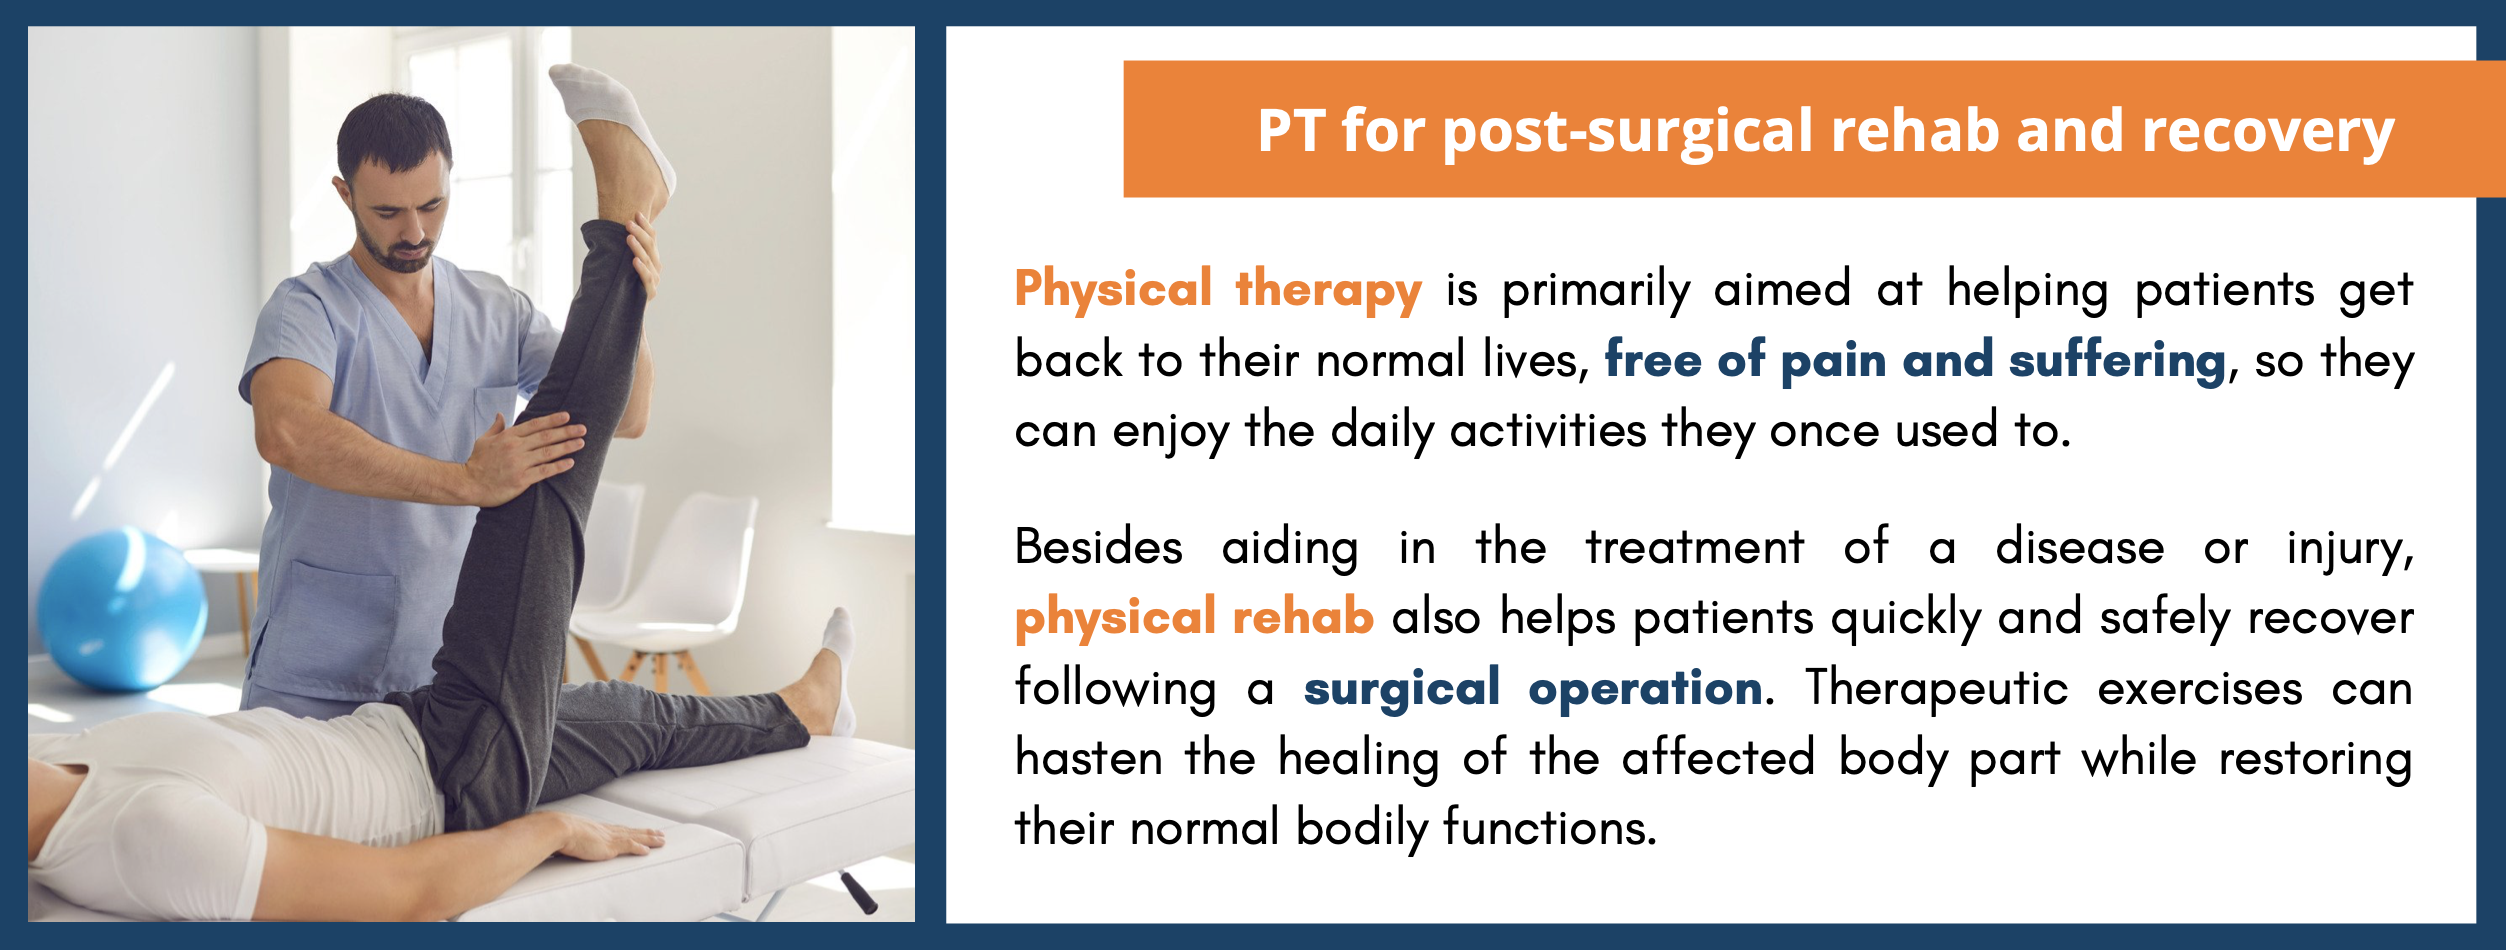 PT for post-surgical rehab and recovery